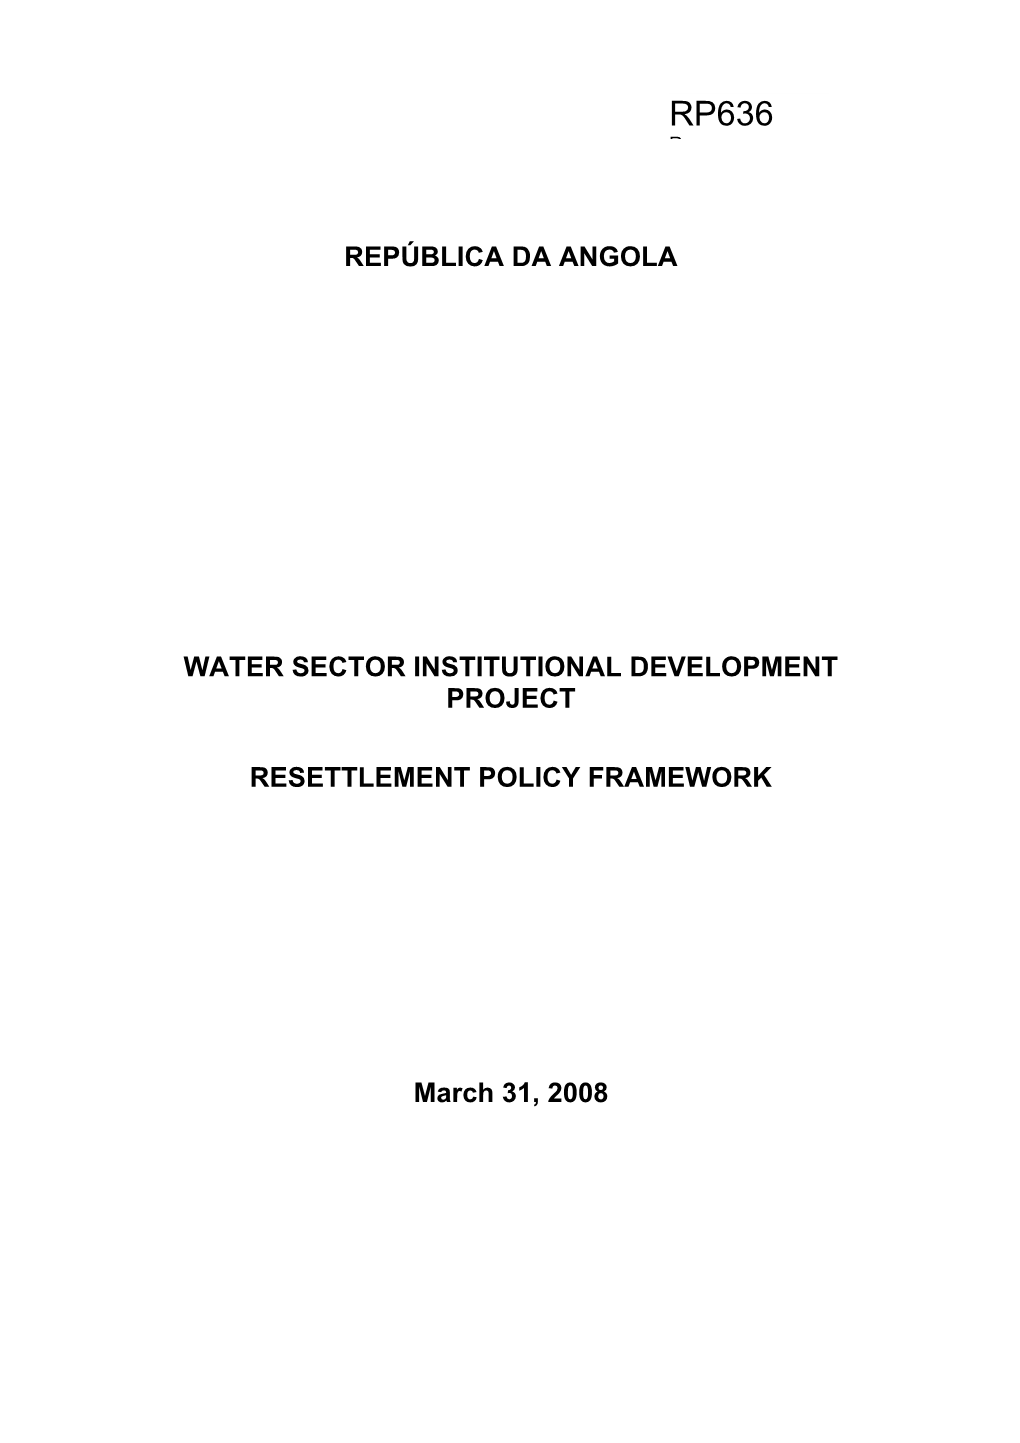 Water Sector Institutional Development Project